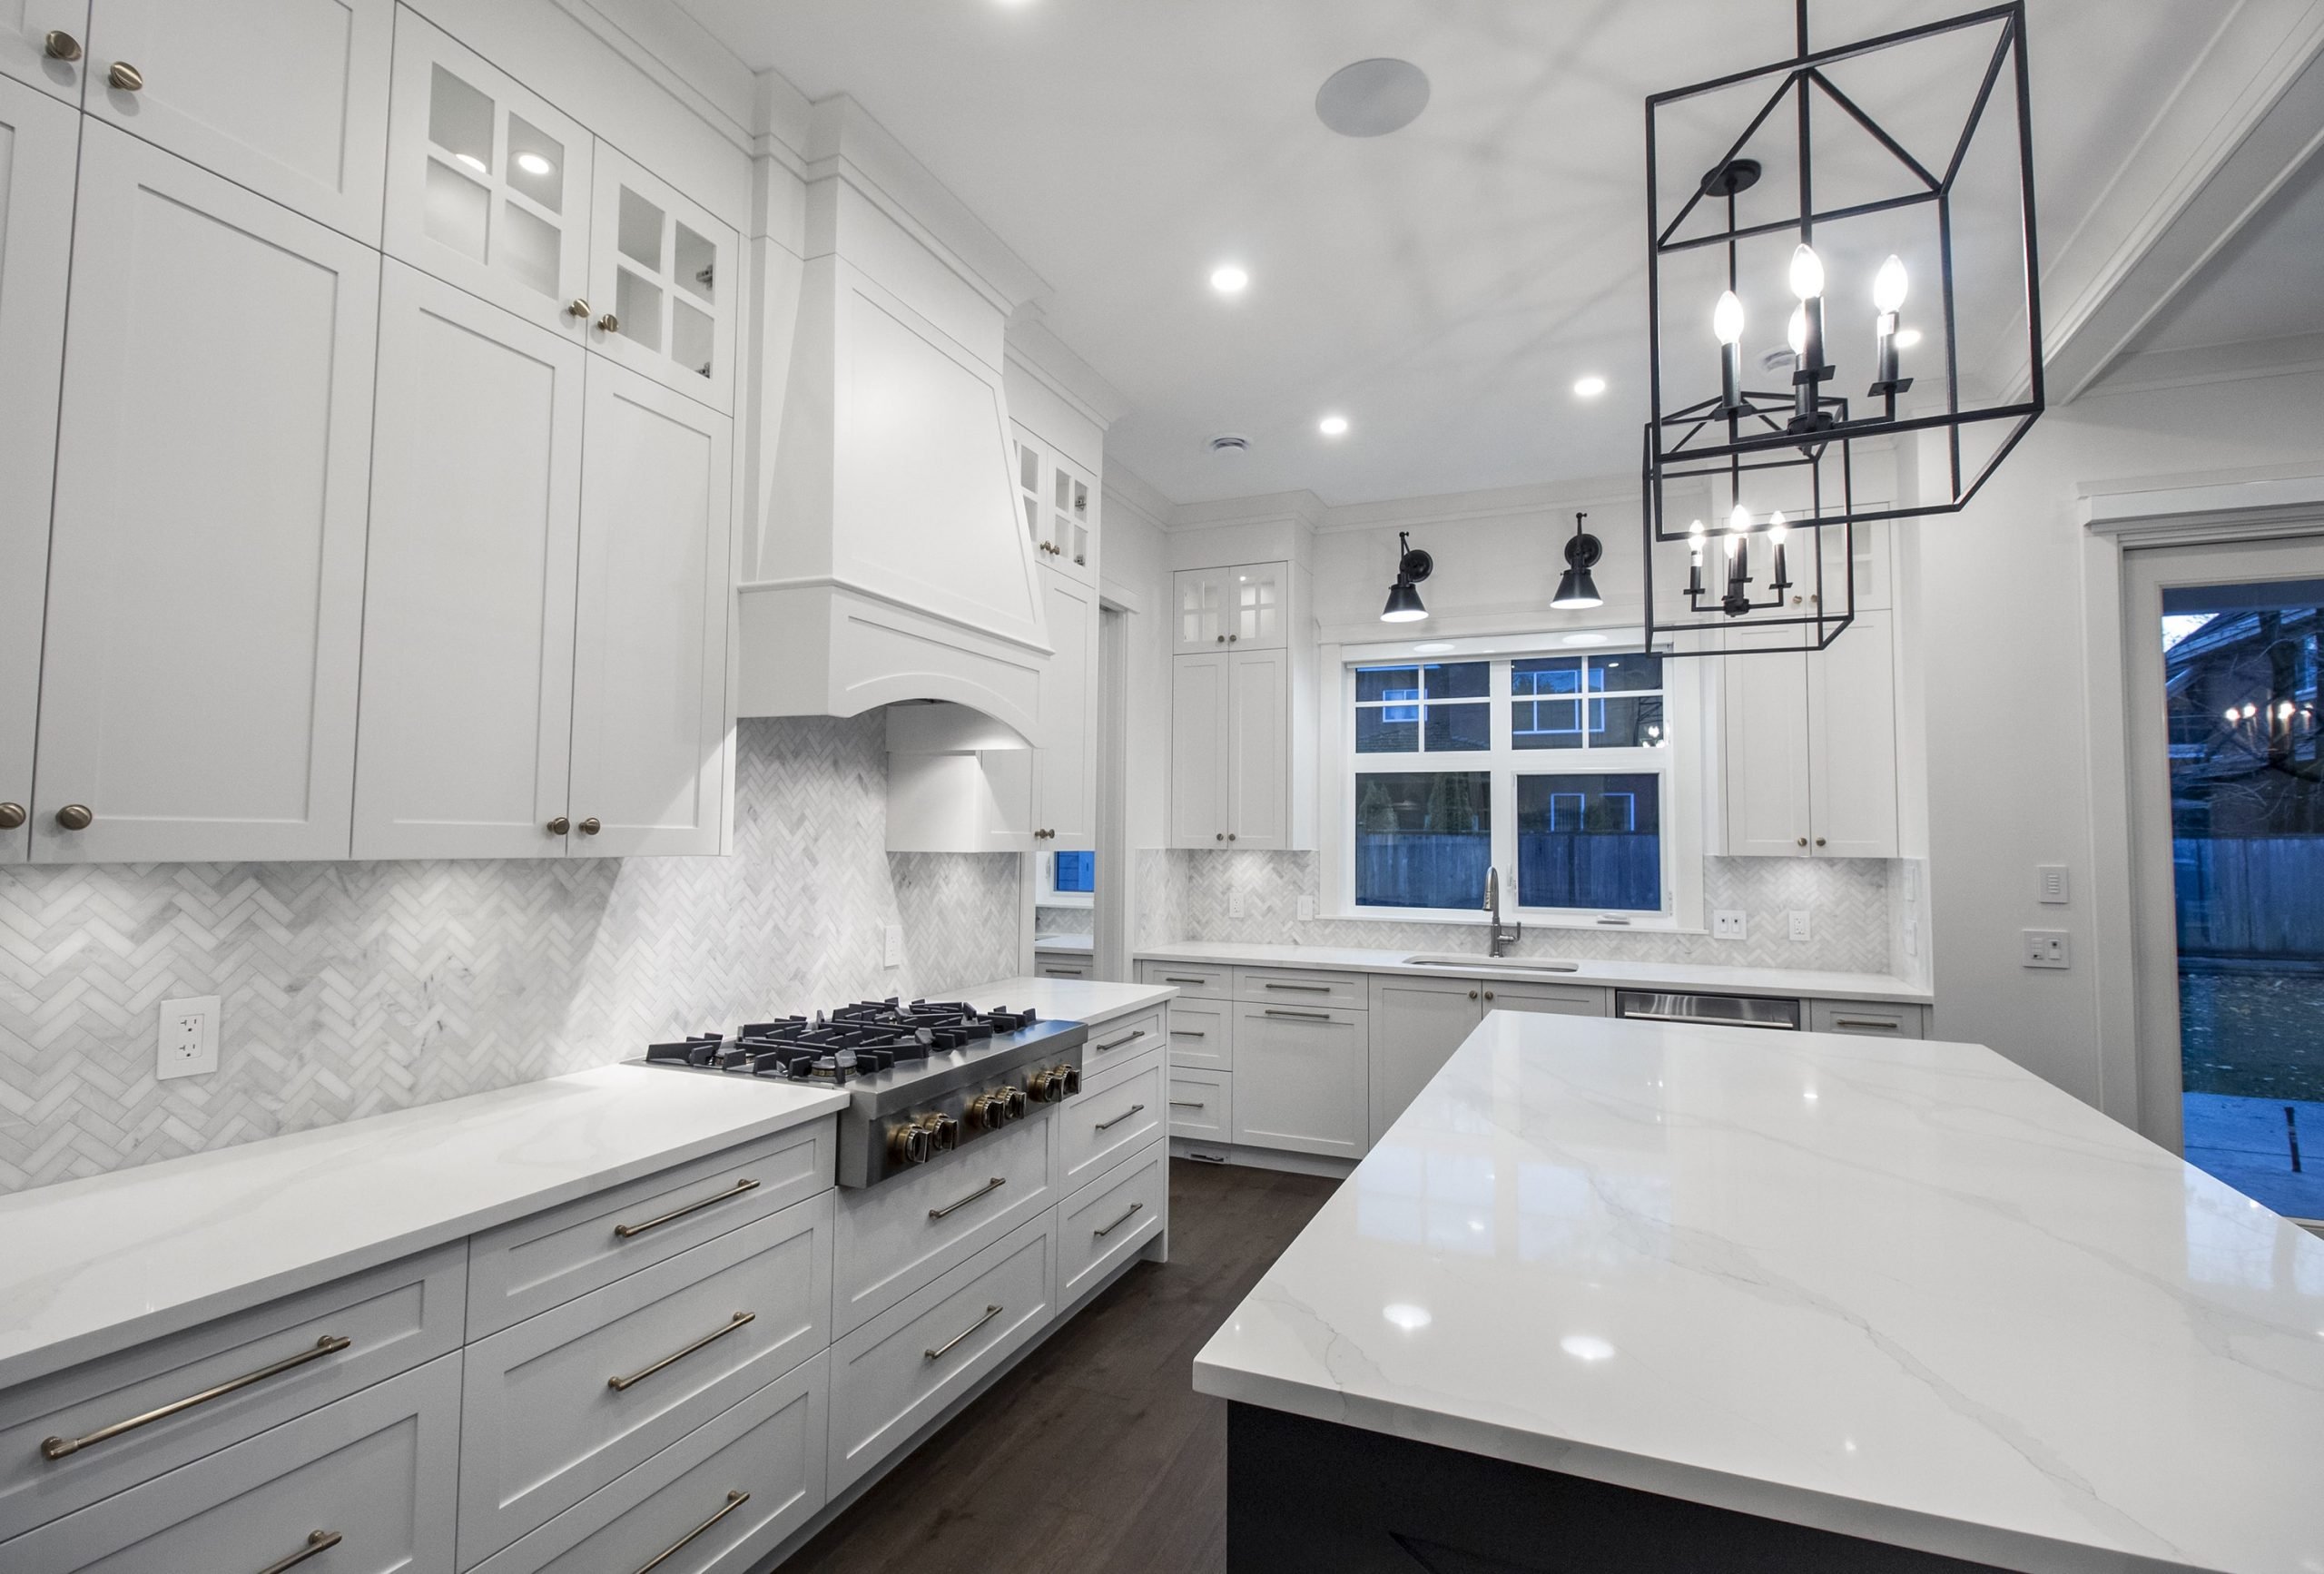 Home Sigma Cabinets, Best Home Kitchen Cabinets Surrey